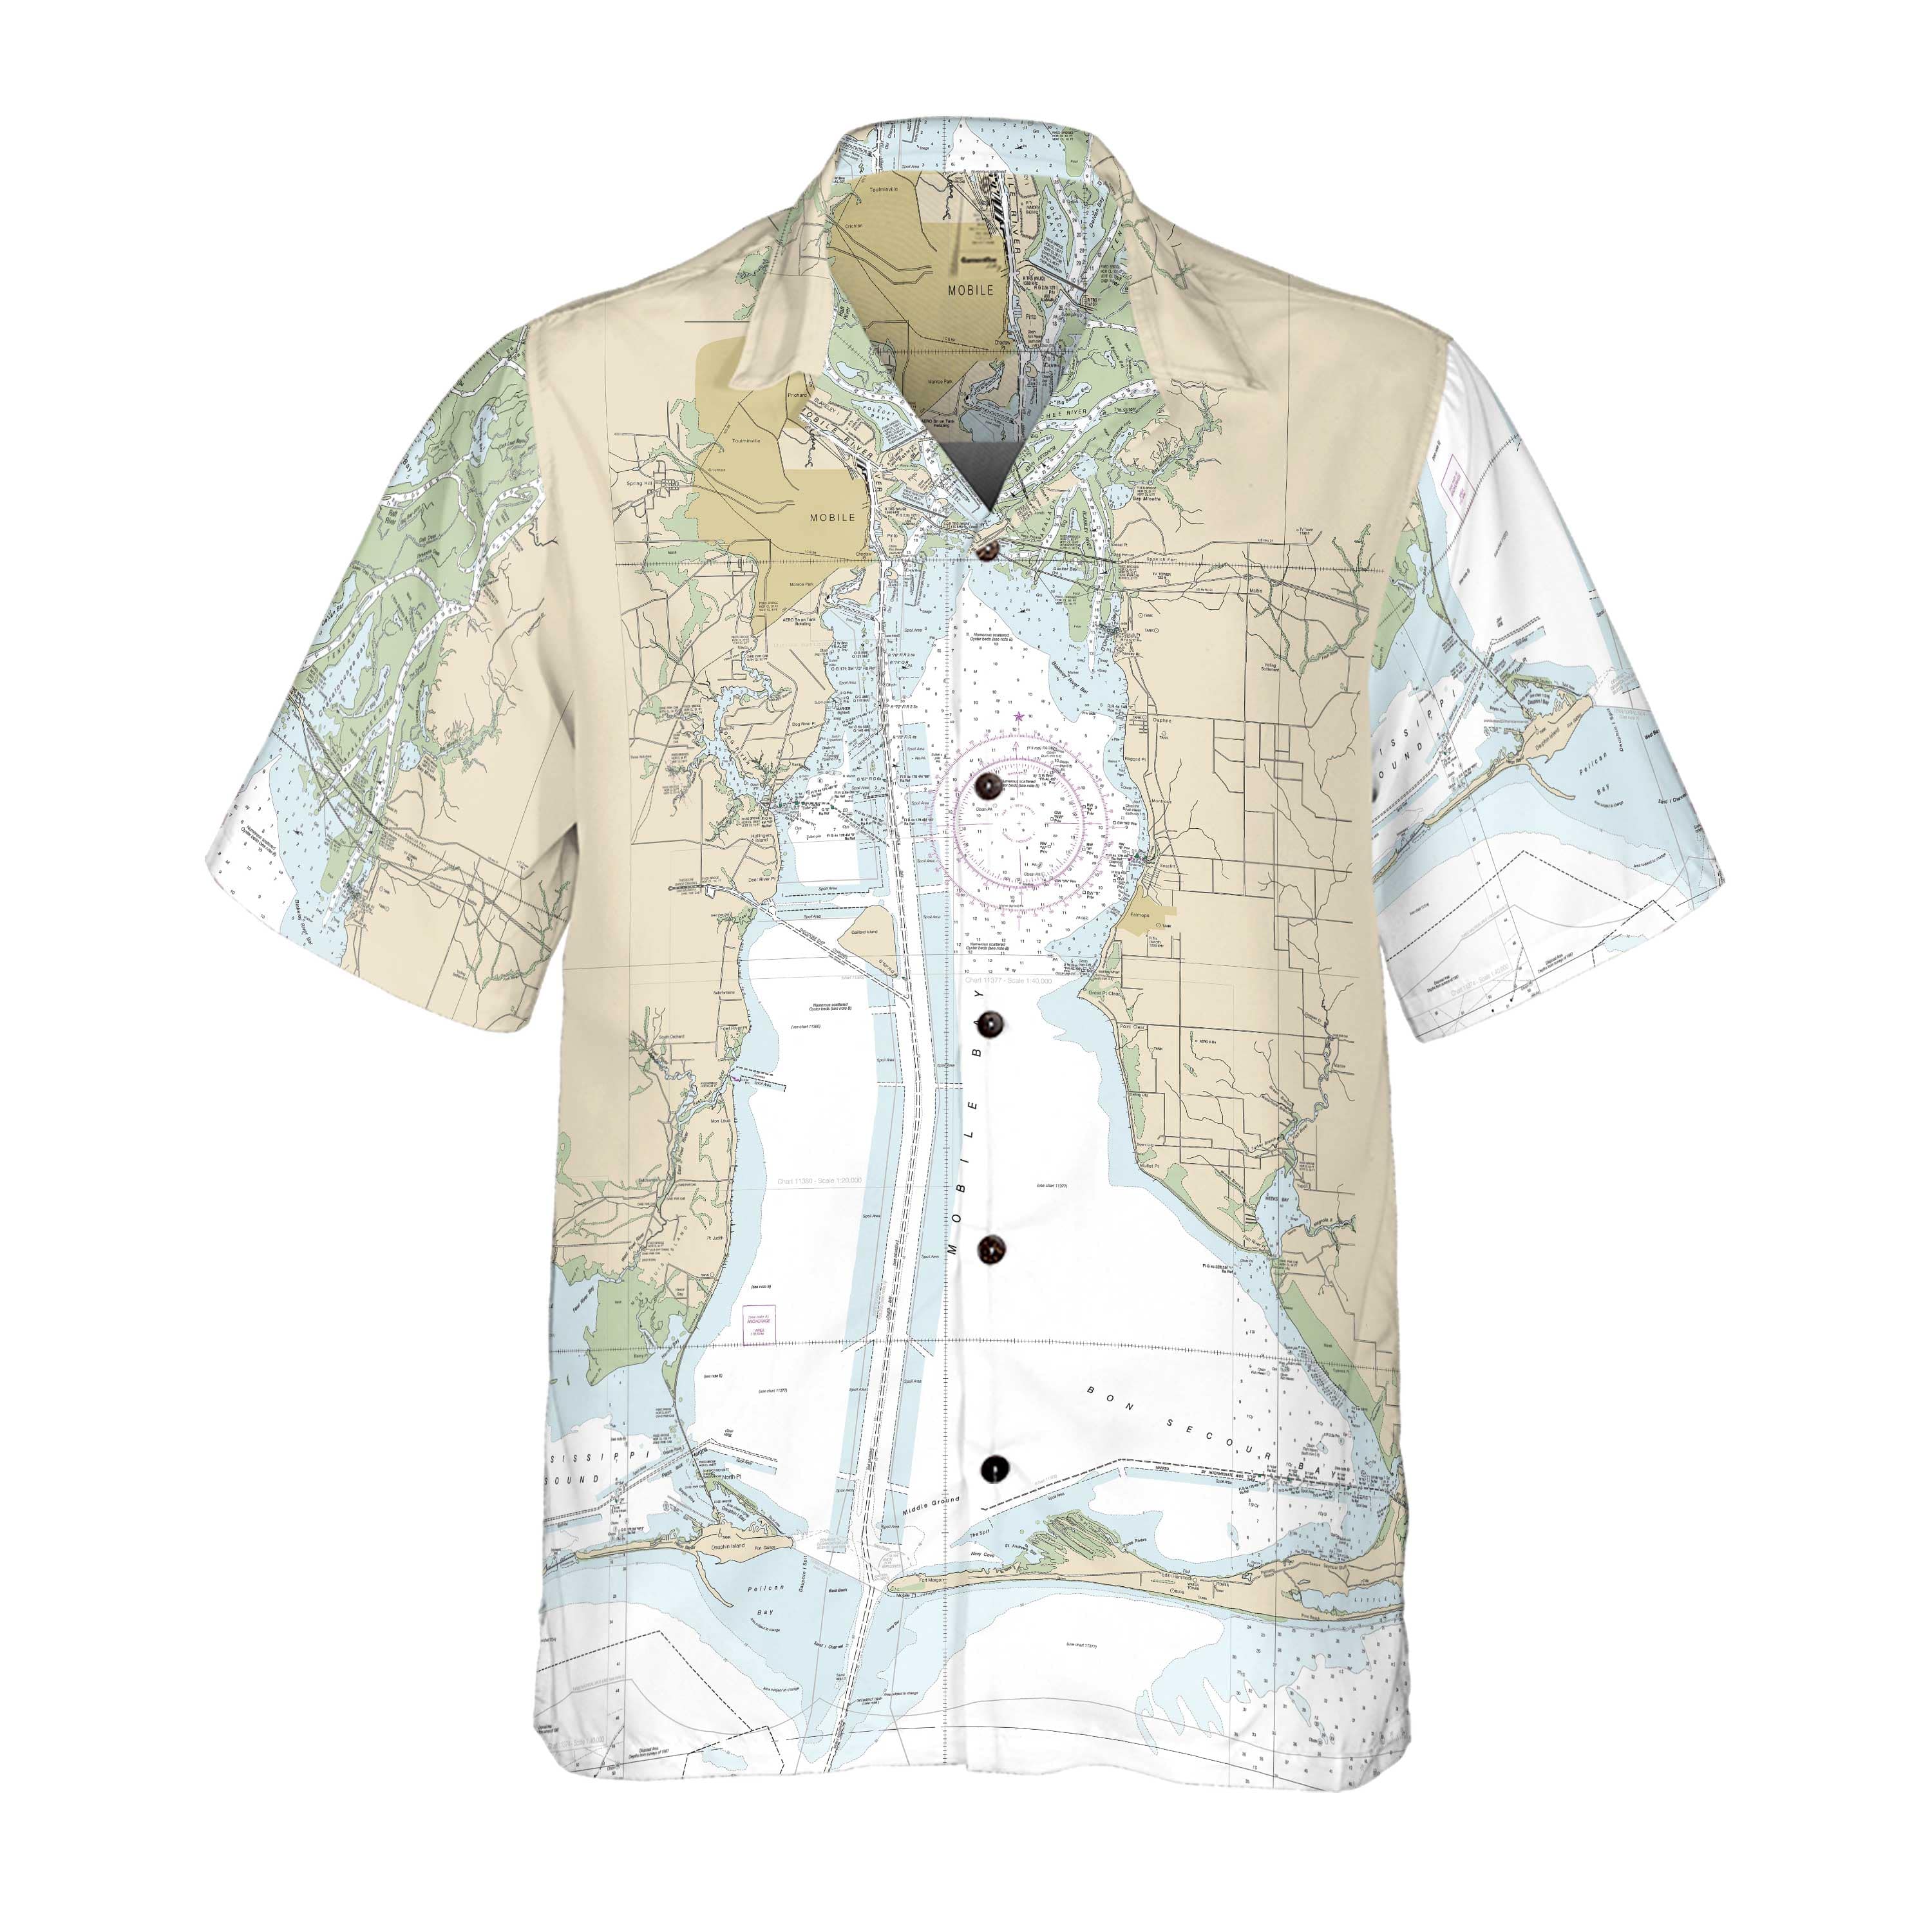 The Mobile Bay Coconut Button Camp Shirt